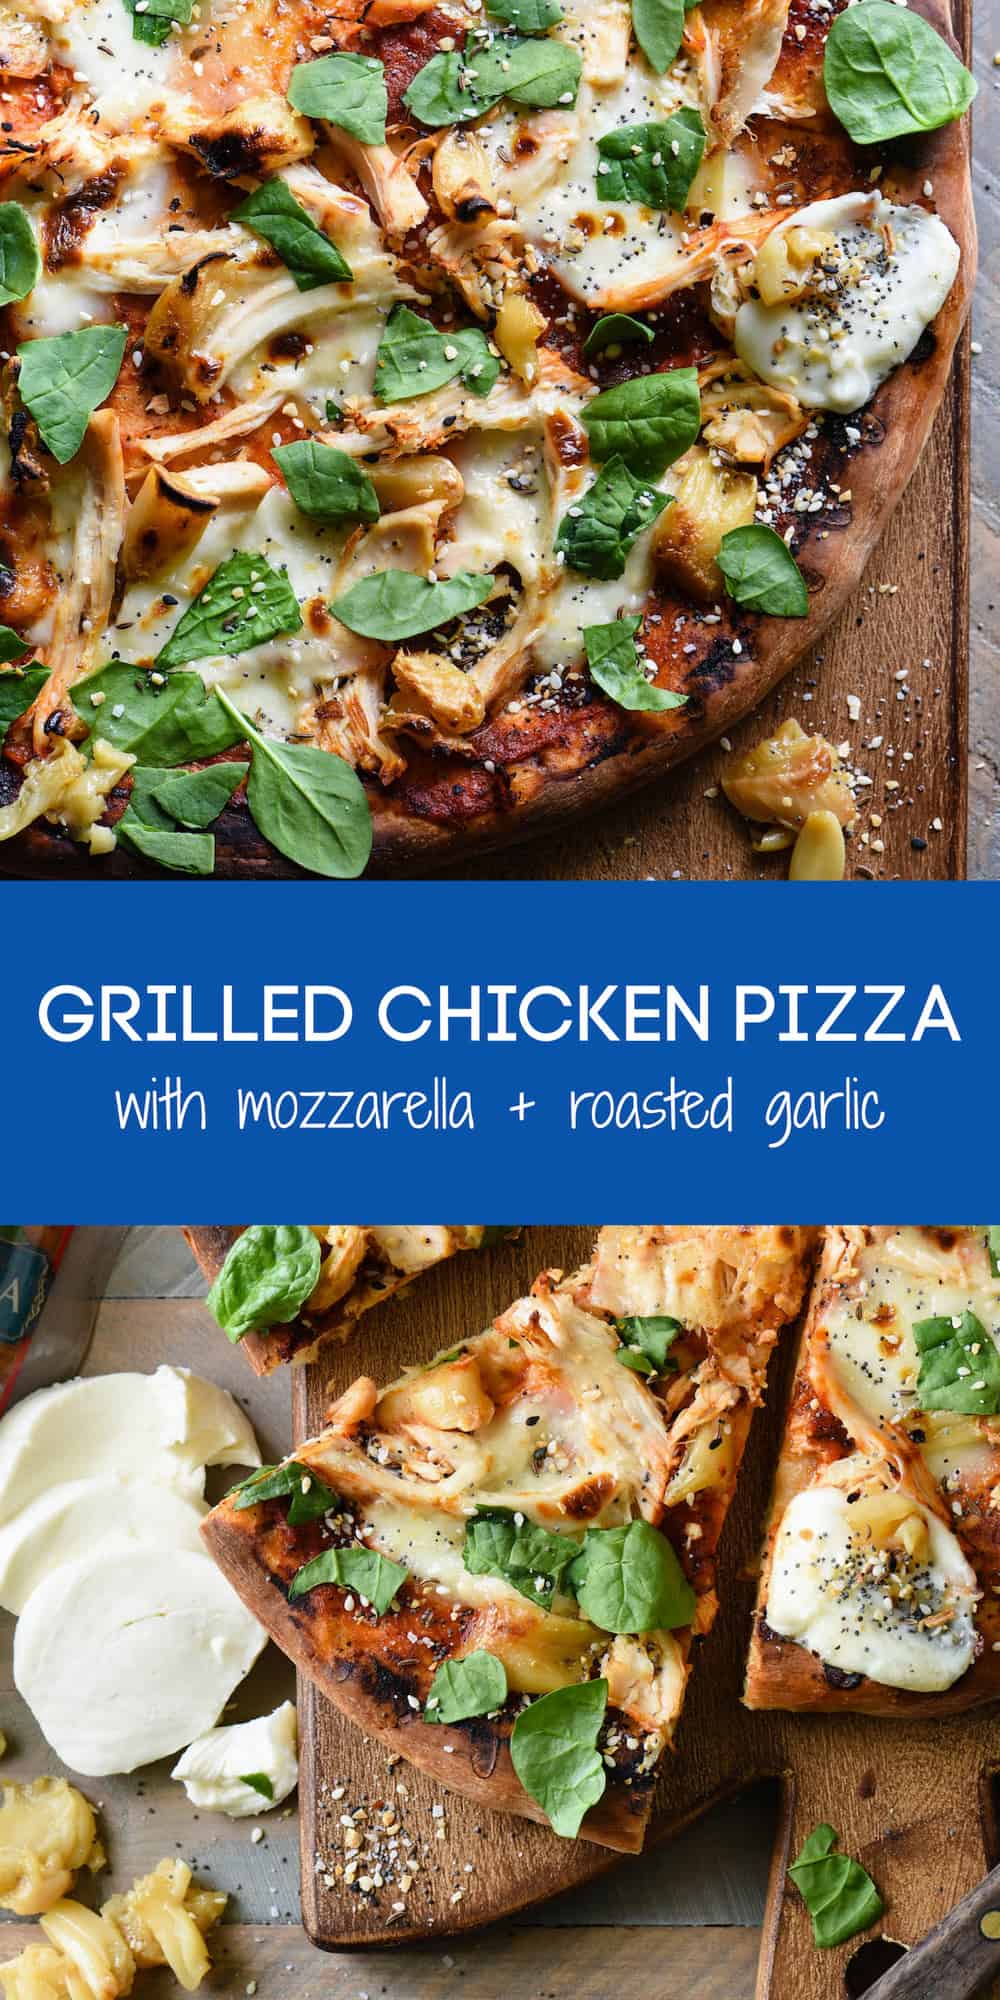 Collage of images of chicken pizza on wooden cutting board with overlay: GRILLED CHICKEN PIZZA with mozzarella + roasted garlic